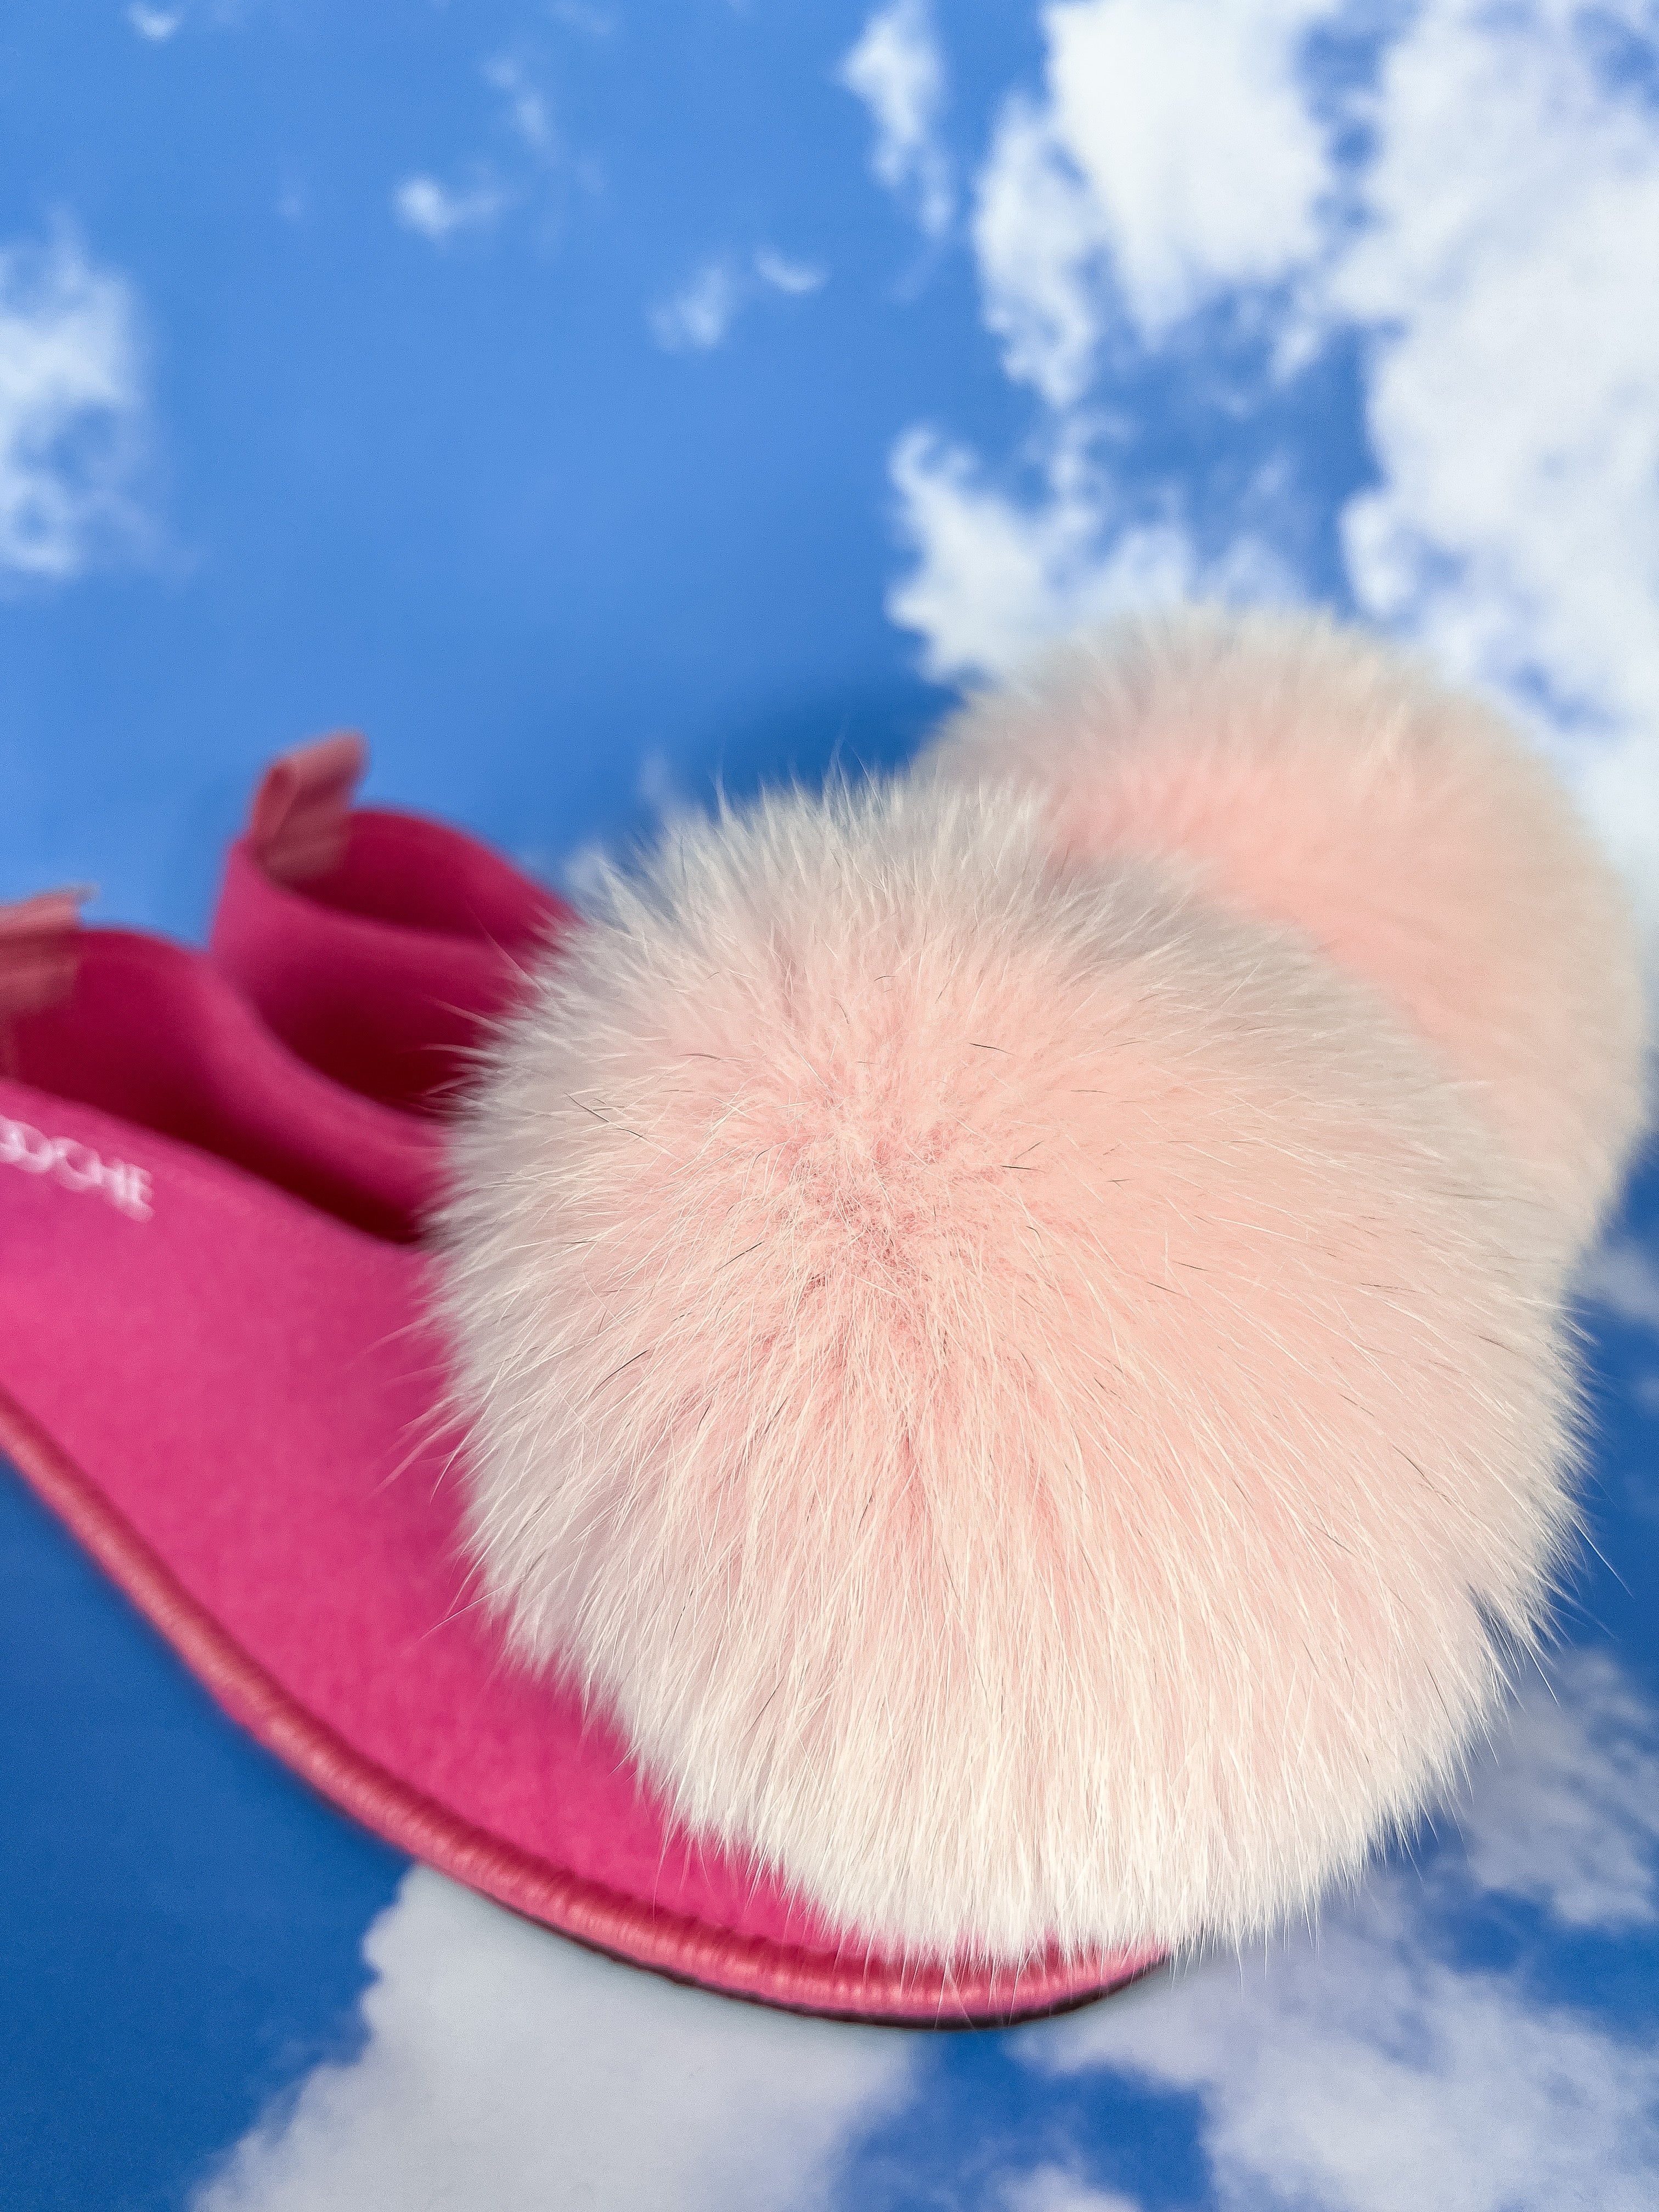 PINK CANDY slippers